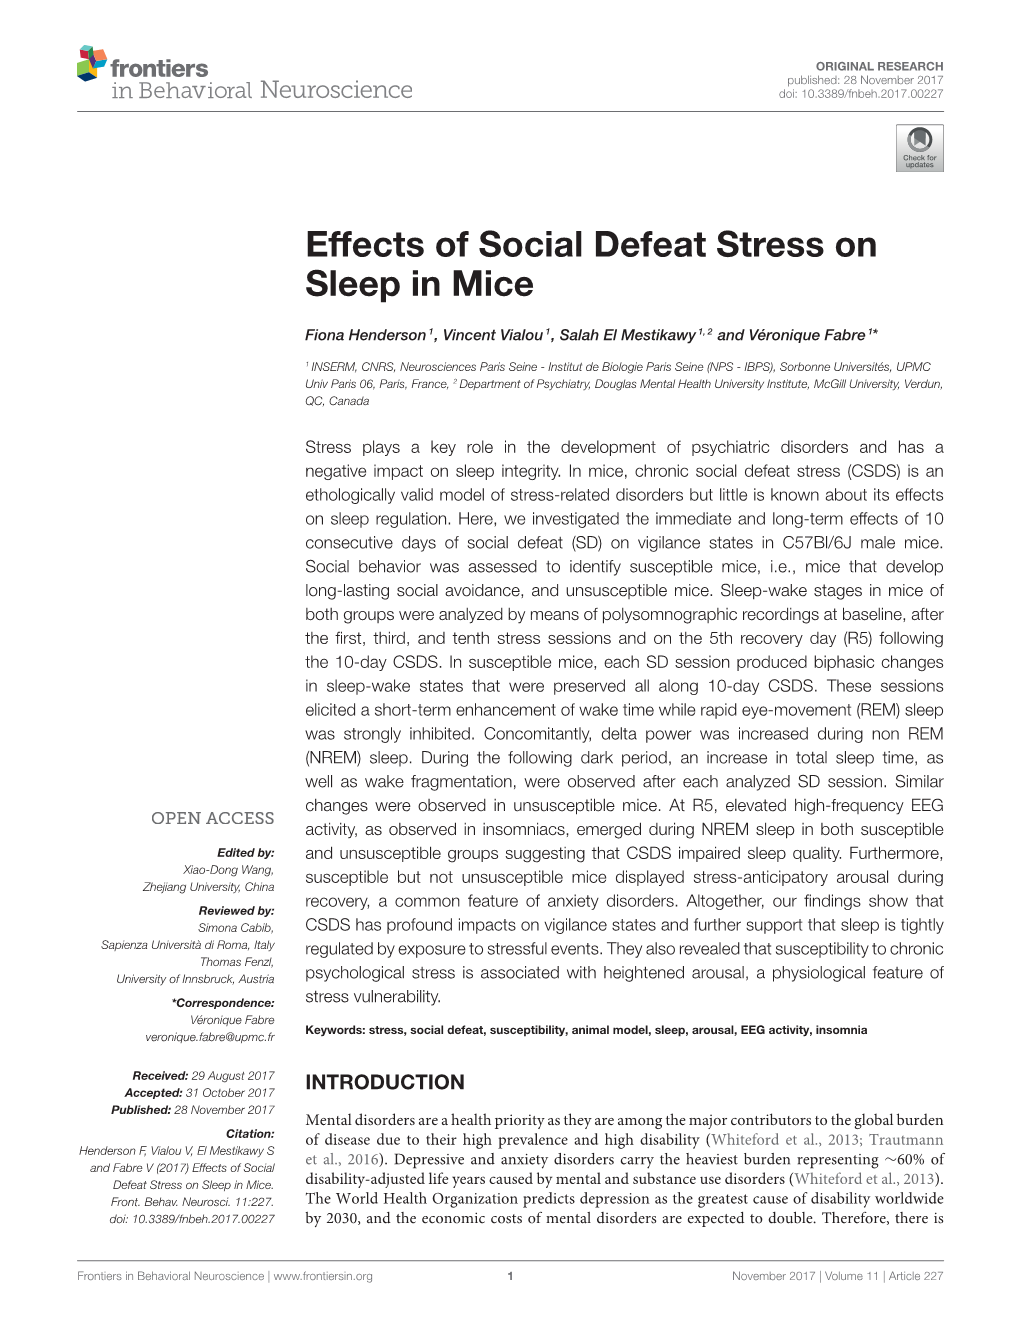 Effects of Social Defeat Stress on Sleep in Mice